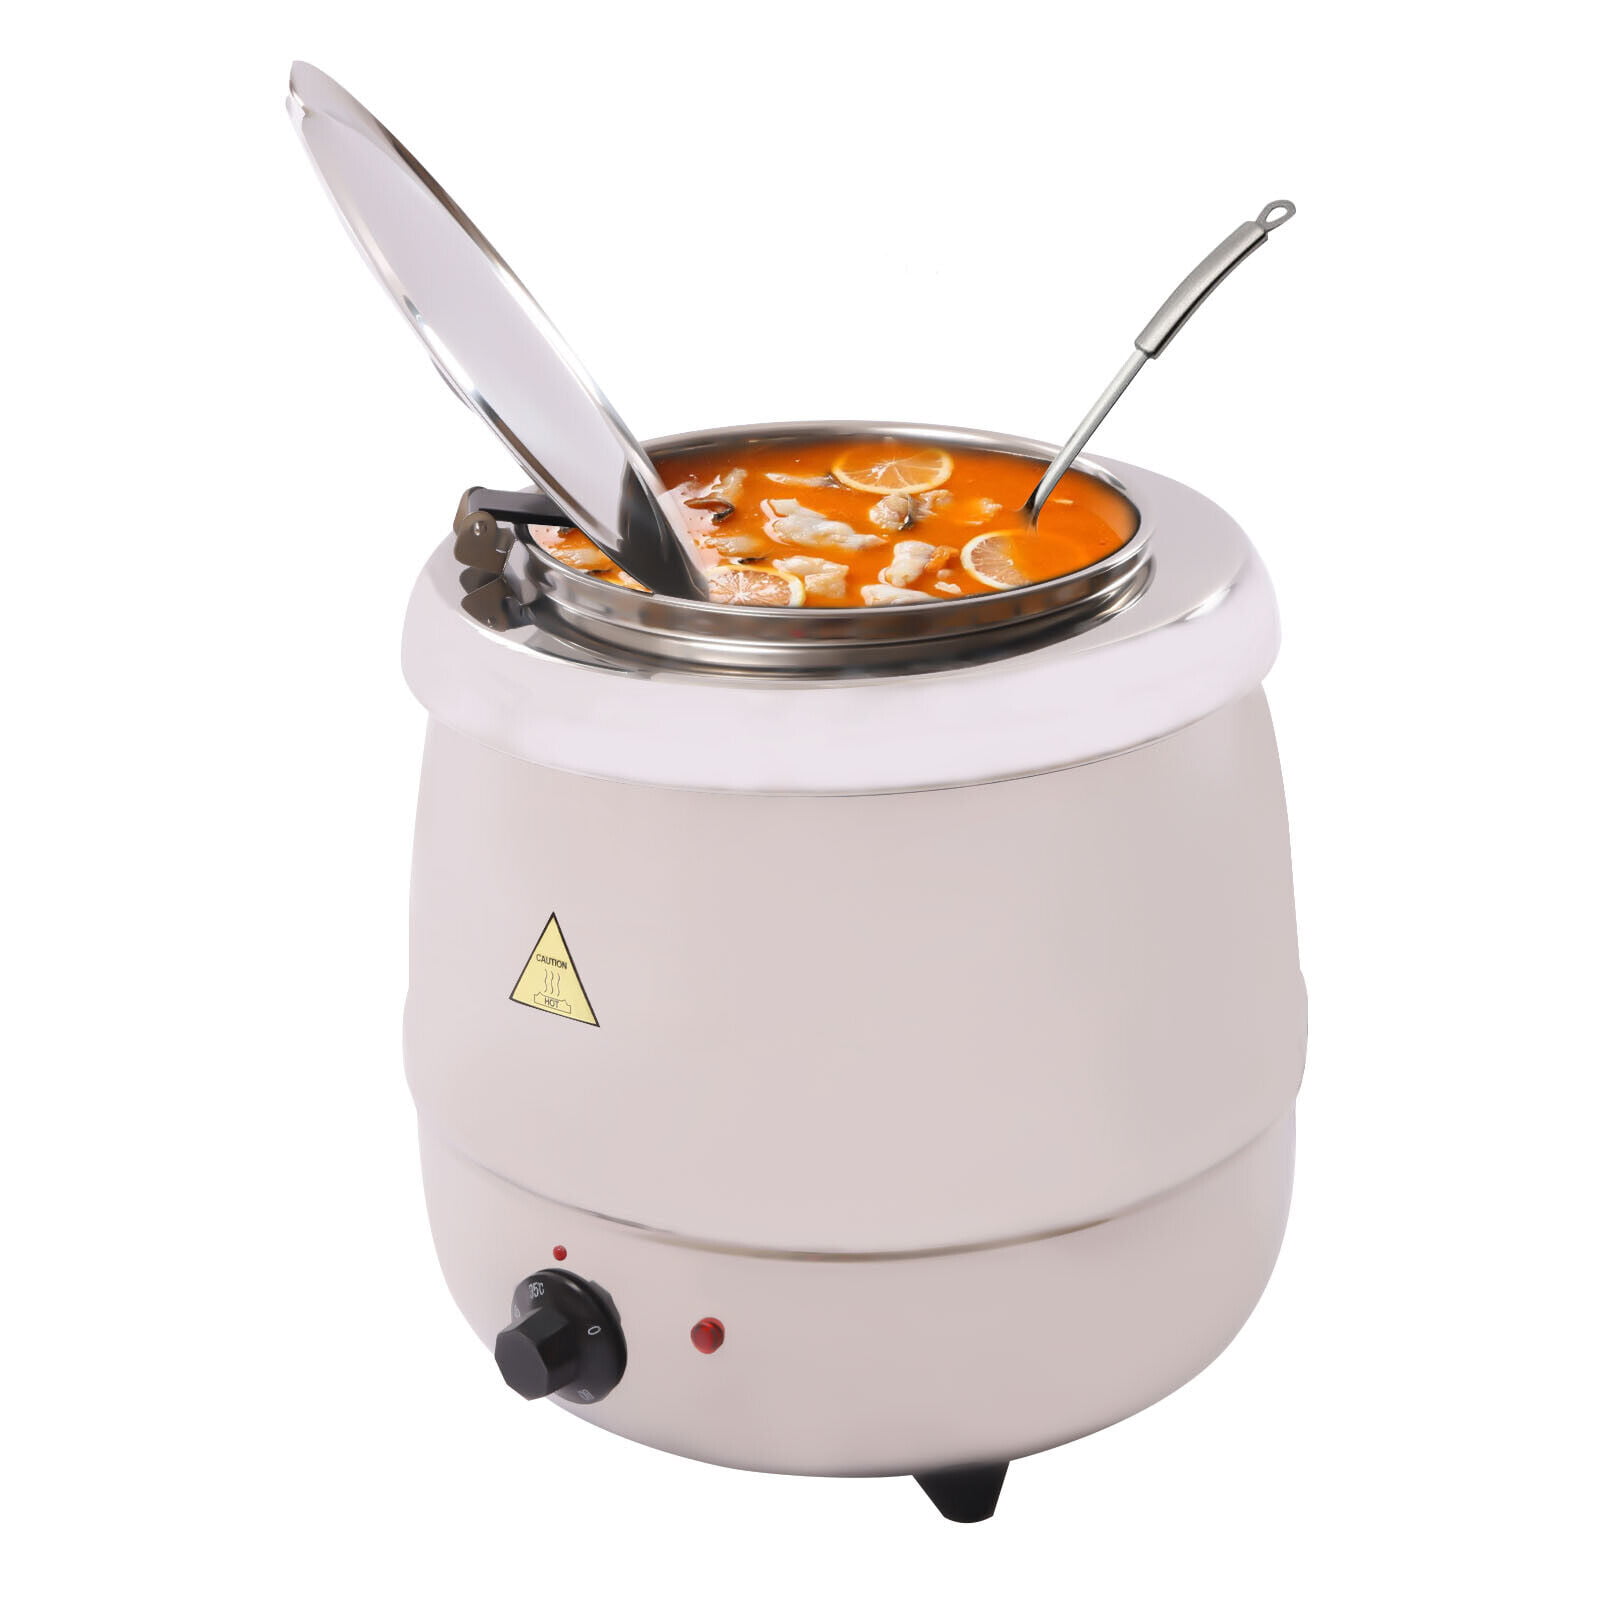 KANGTEEN 10L Commercial Electric Soup Kettle Warmer, Electric Stainless Steel Food Warmer Pot Black Temperature Adjustable 86-185, Size: 35*35*36cm (13.78*